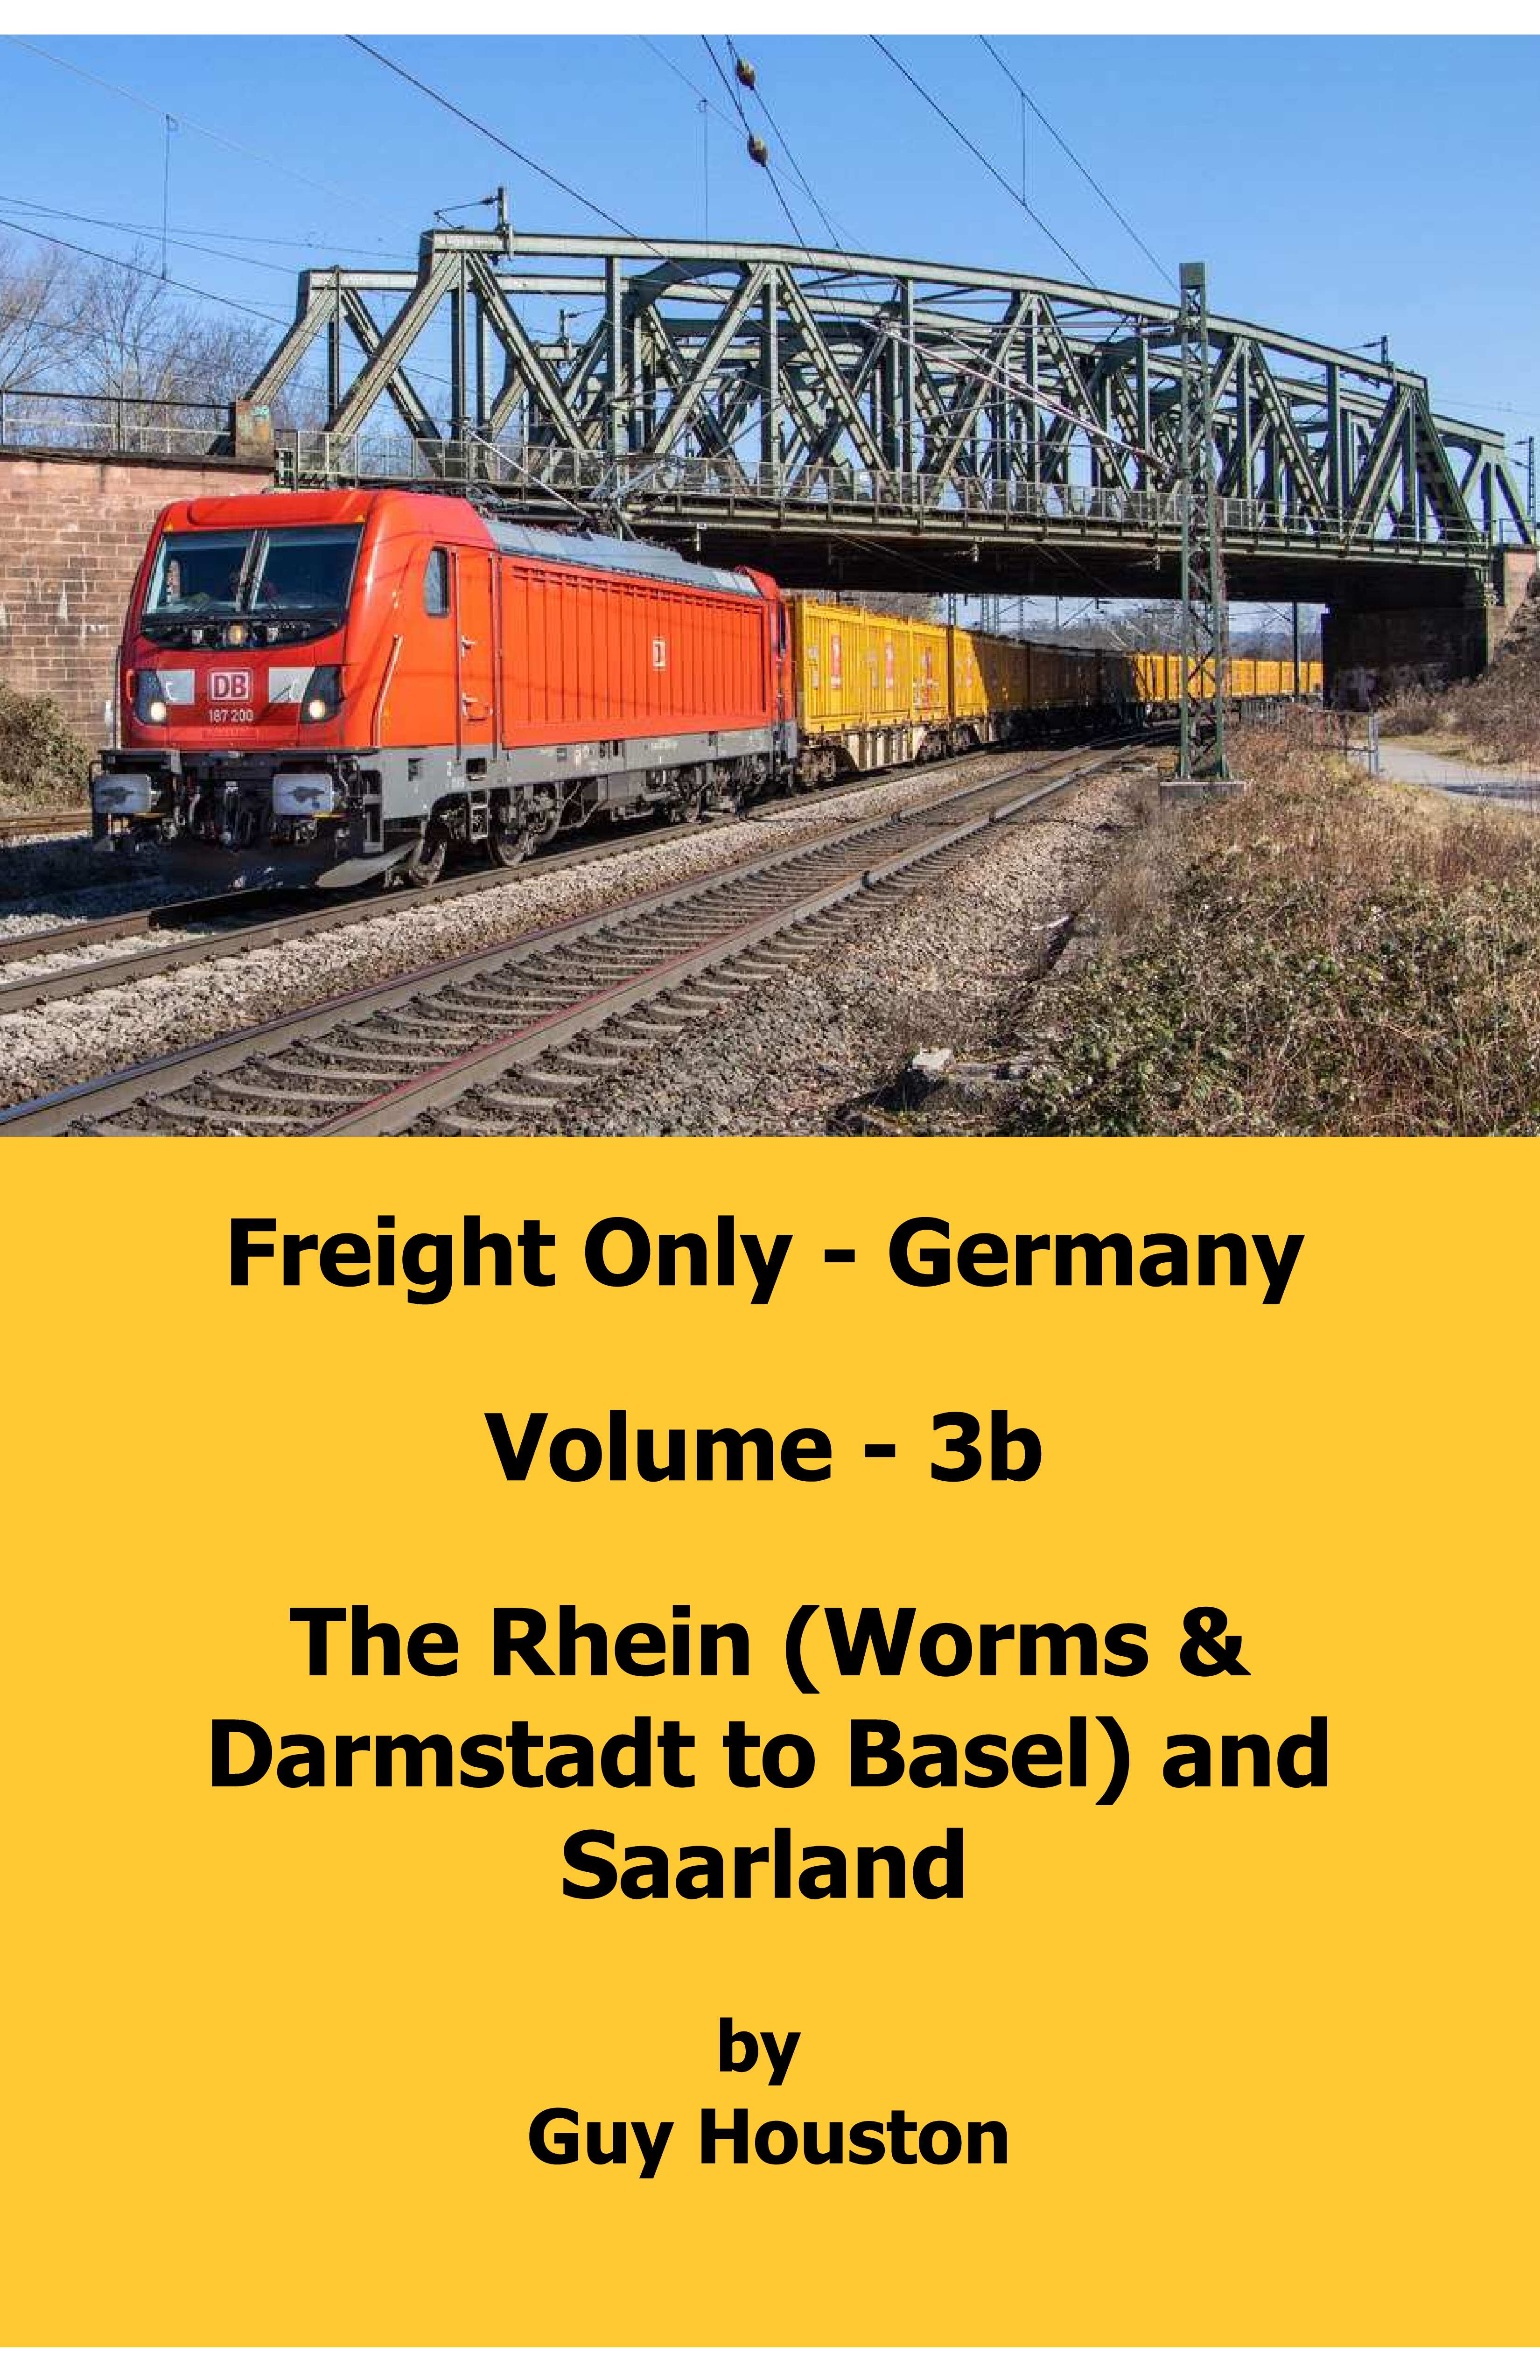 Cover of Freight only - Germany Volume 3b - The Rhein (Worms to Darmstadt & Basel) and Saarland